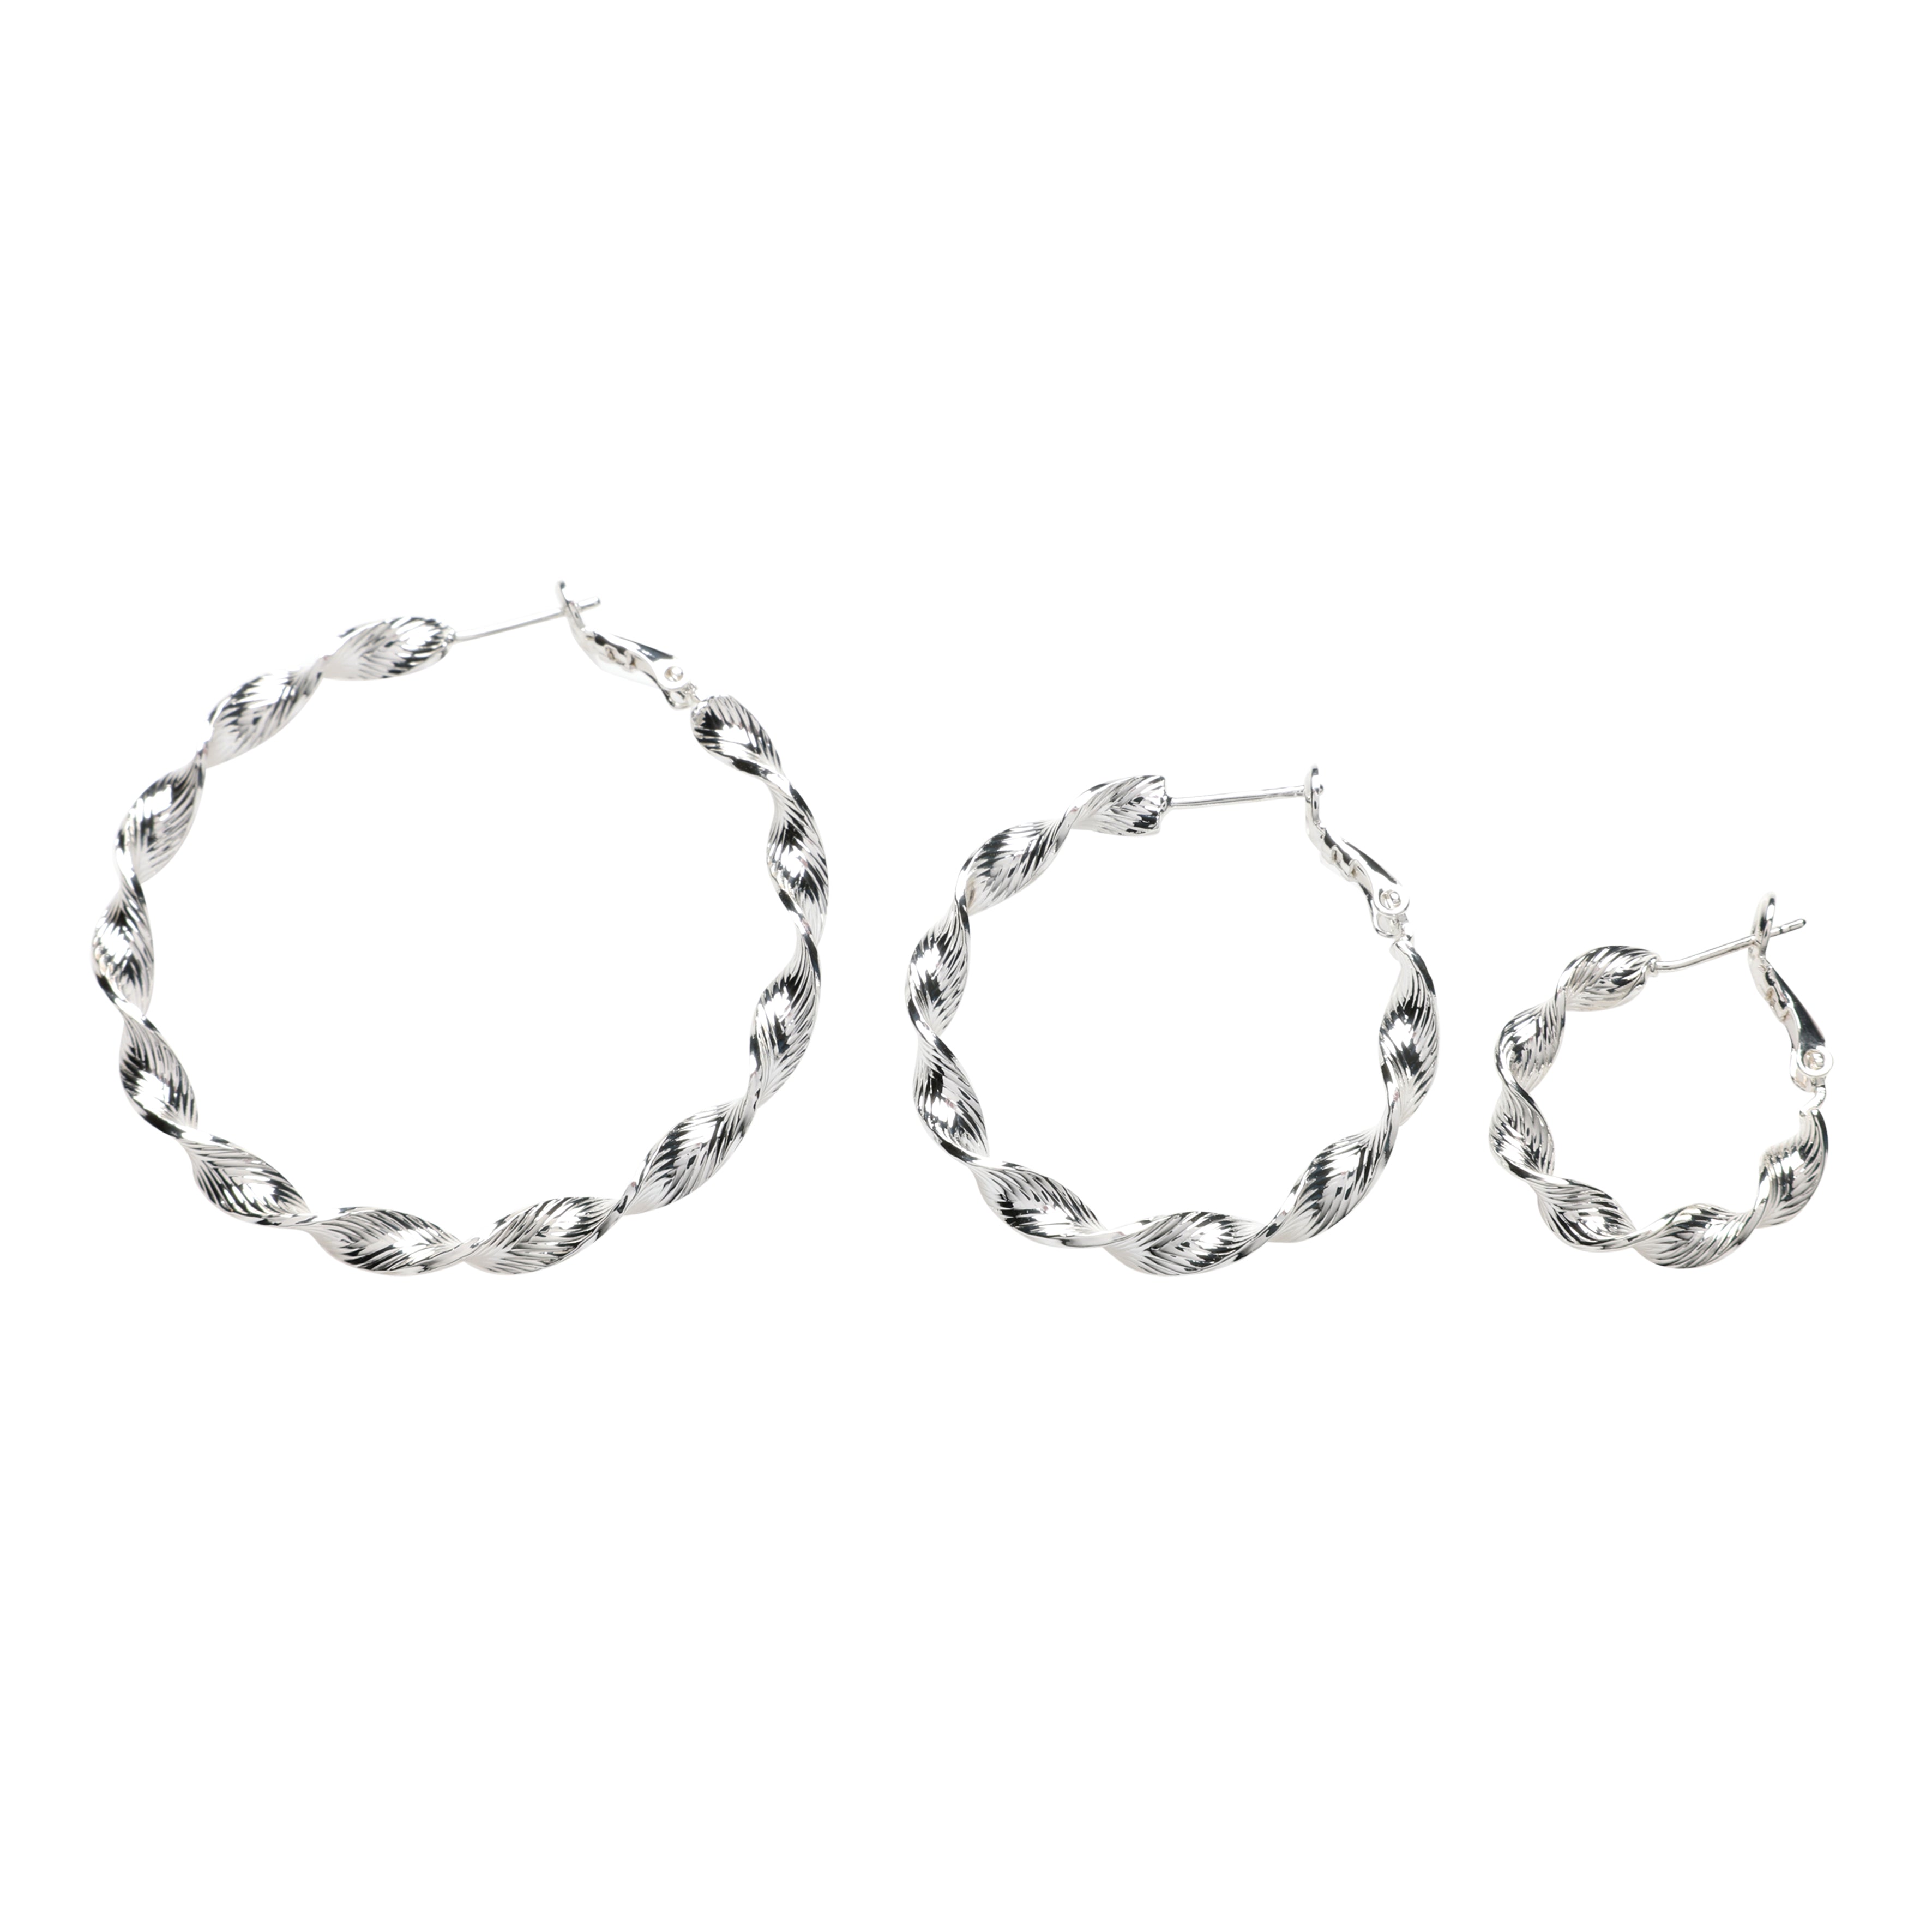 Twisted hoops - 50mm, 925S Sterling silver plated, 1 pair